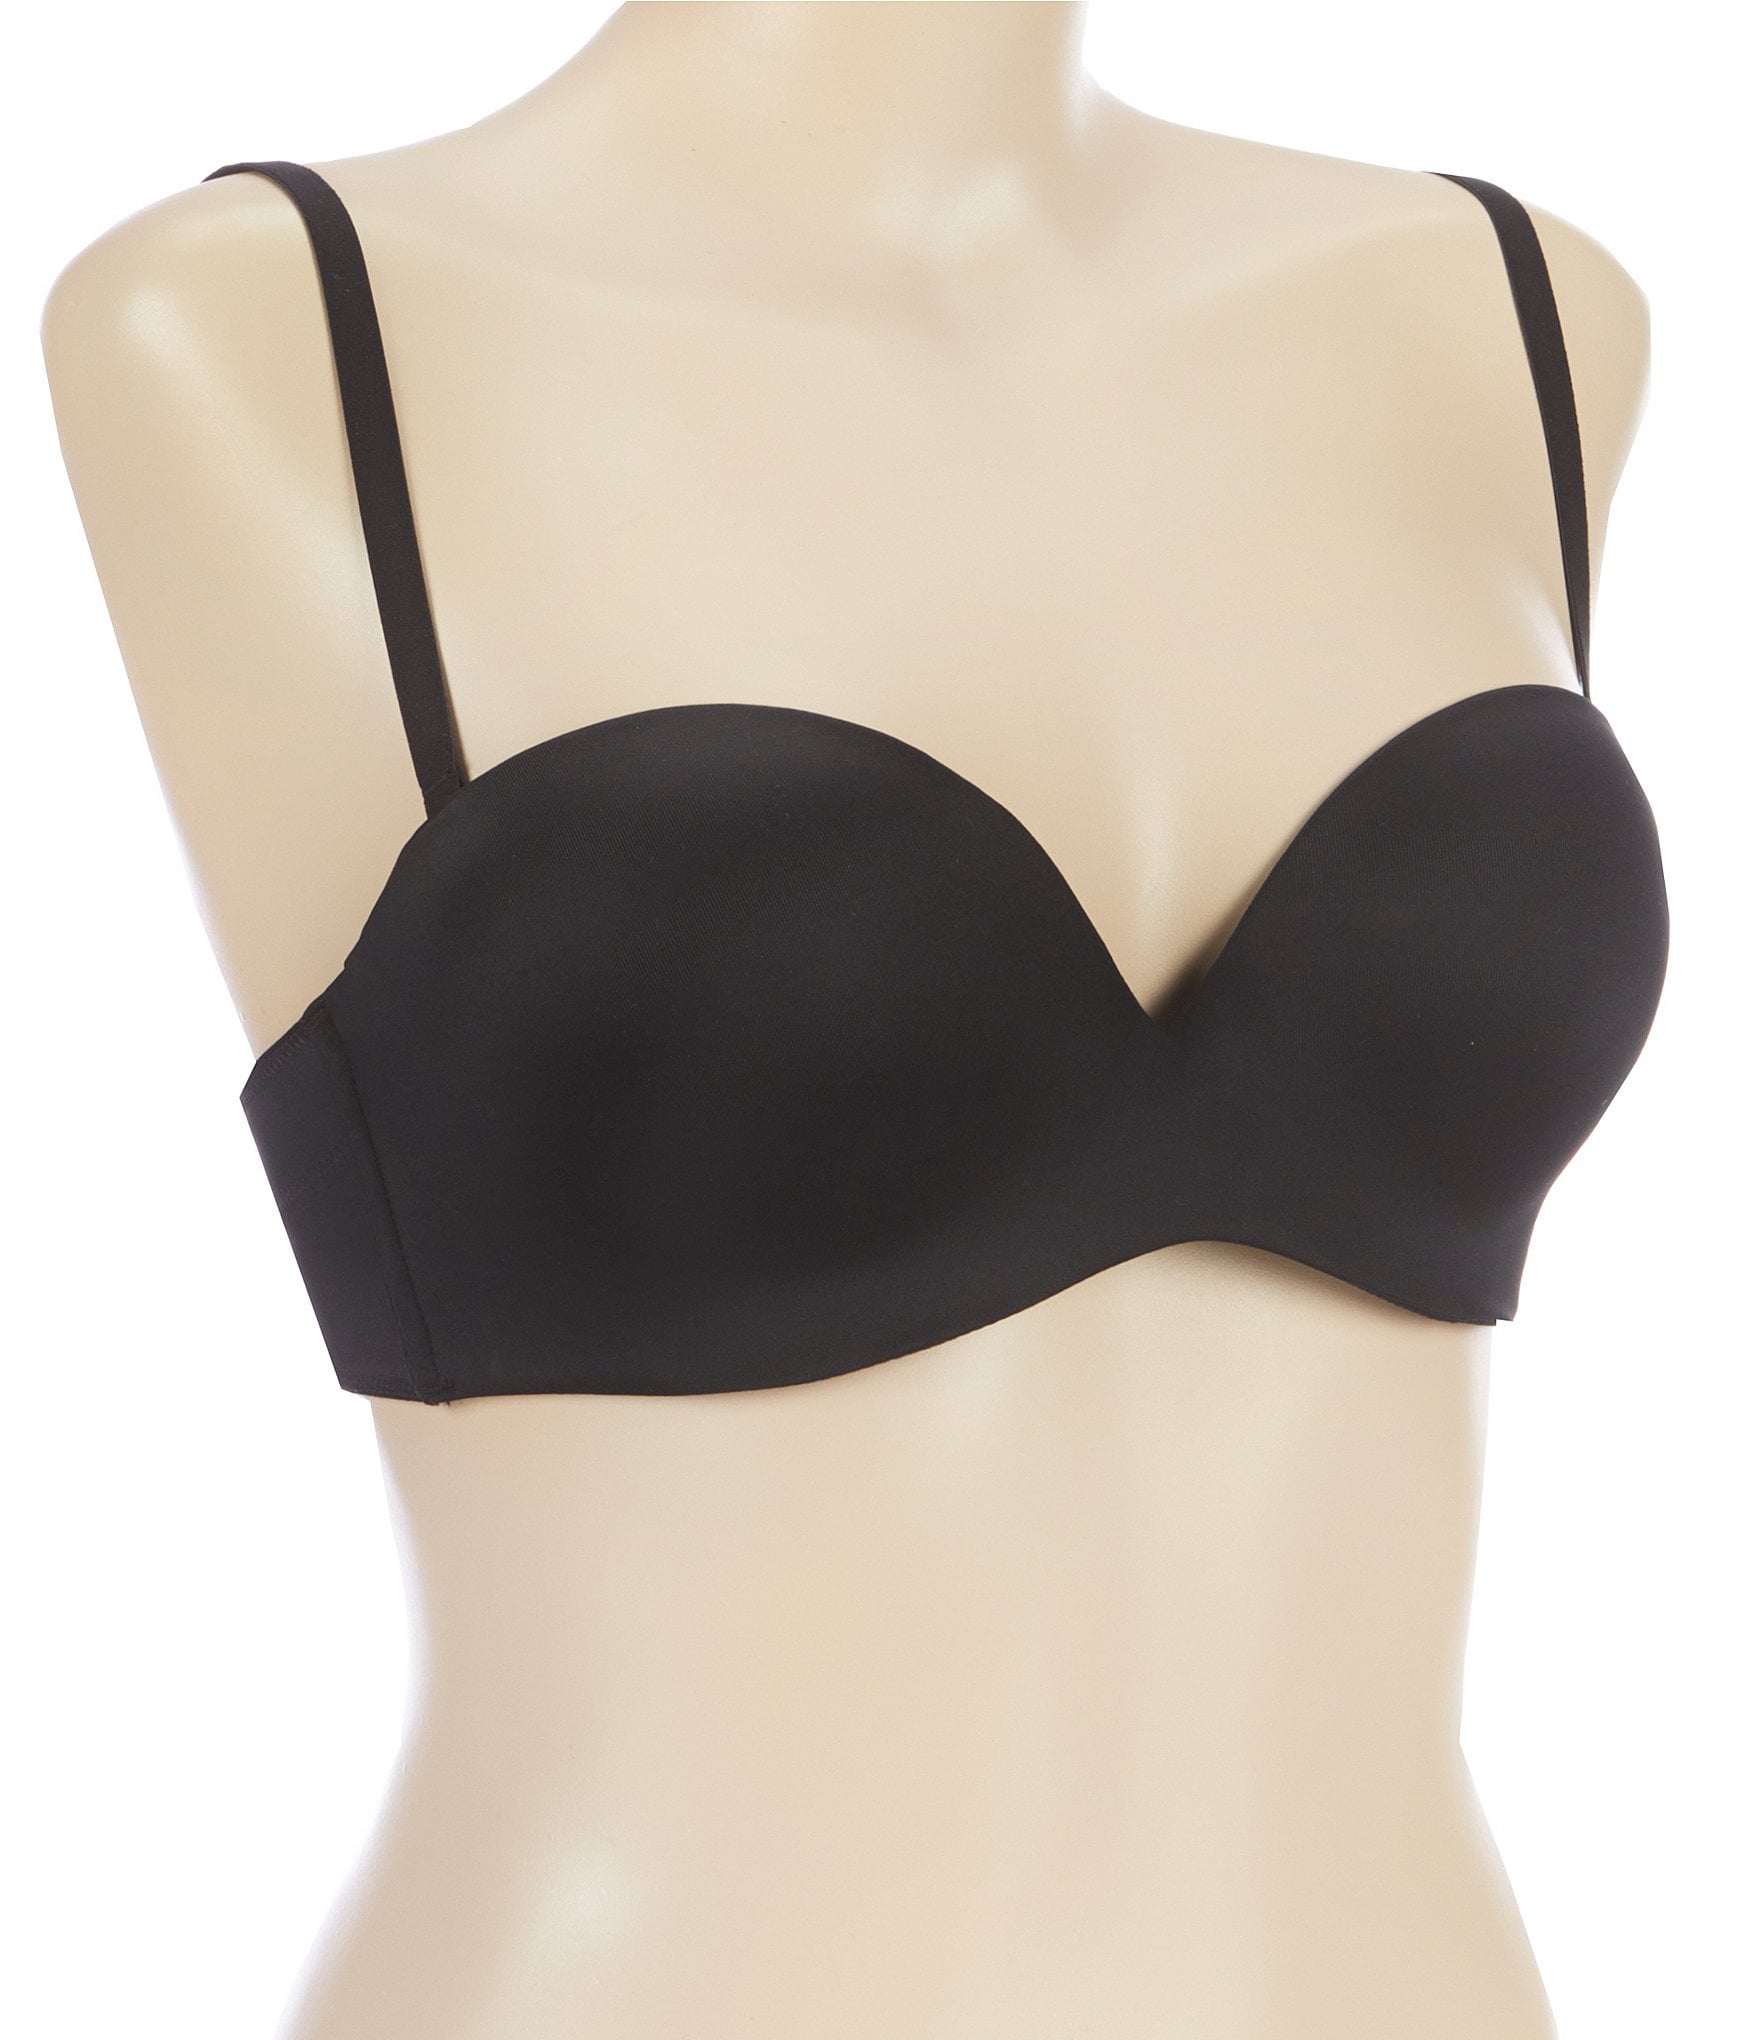  Fine Lines Women's Low Cut Strapless Convertible Bra RL030A 32D  Black : Clothing, Shoes & Jewelry